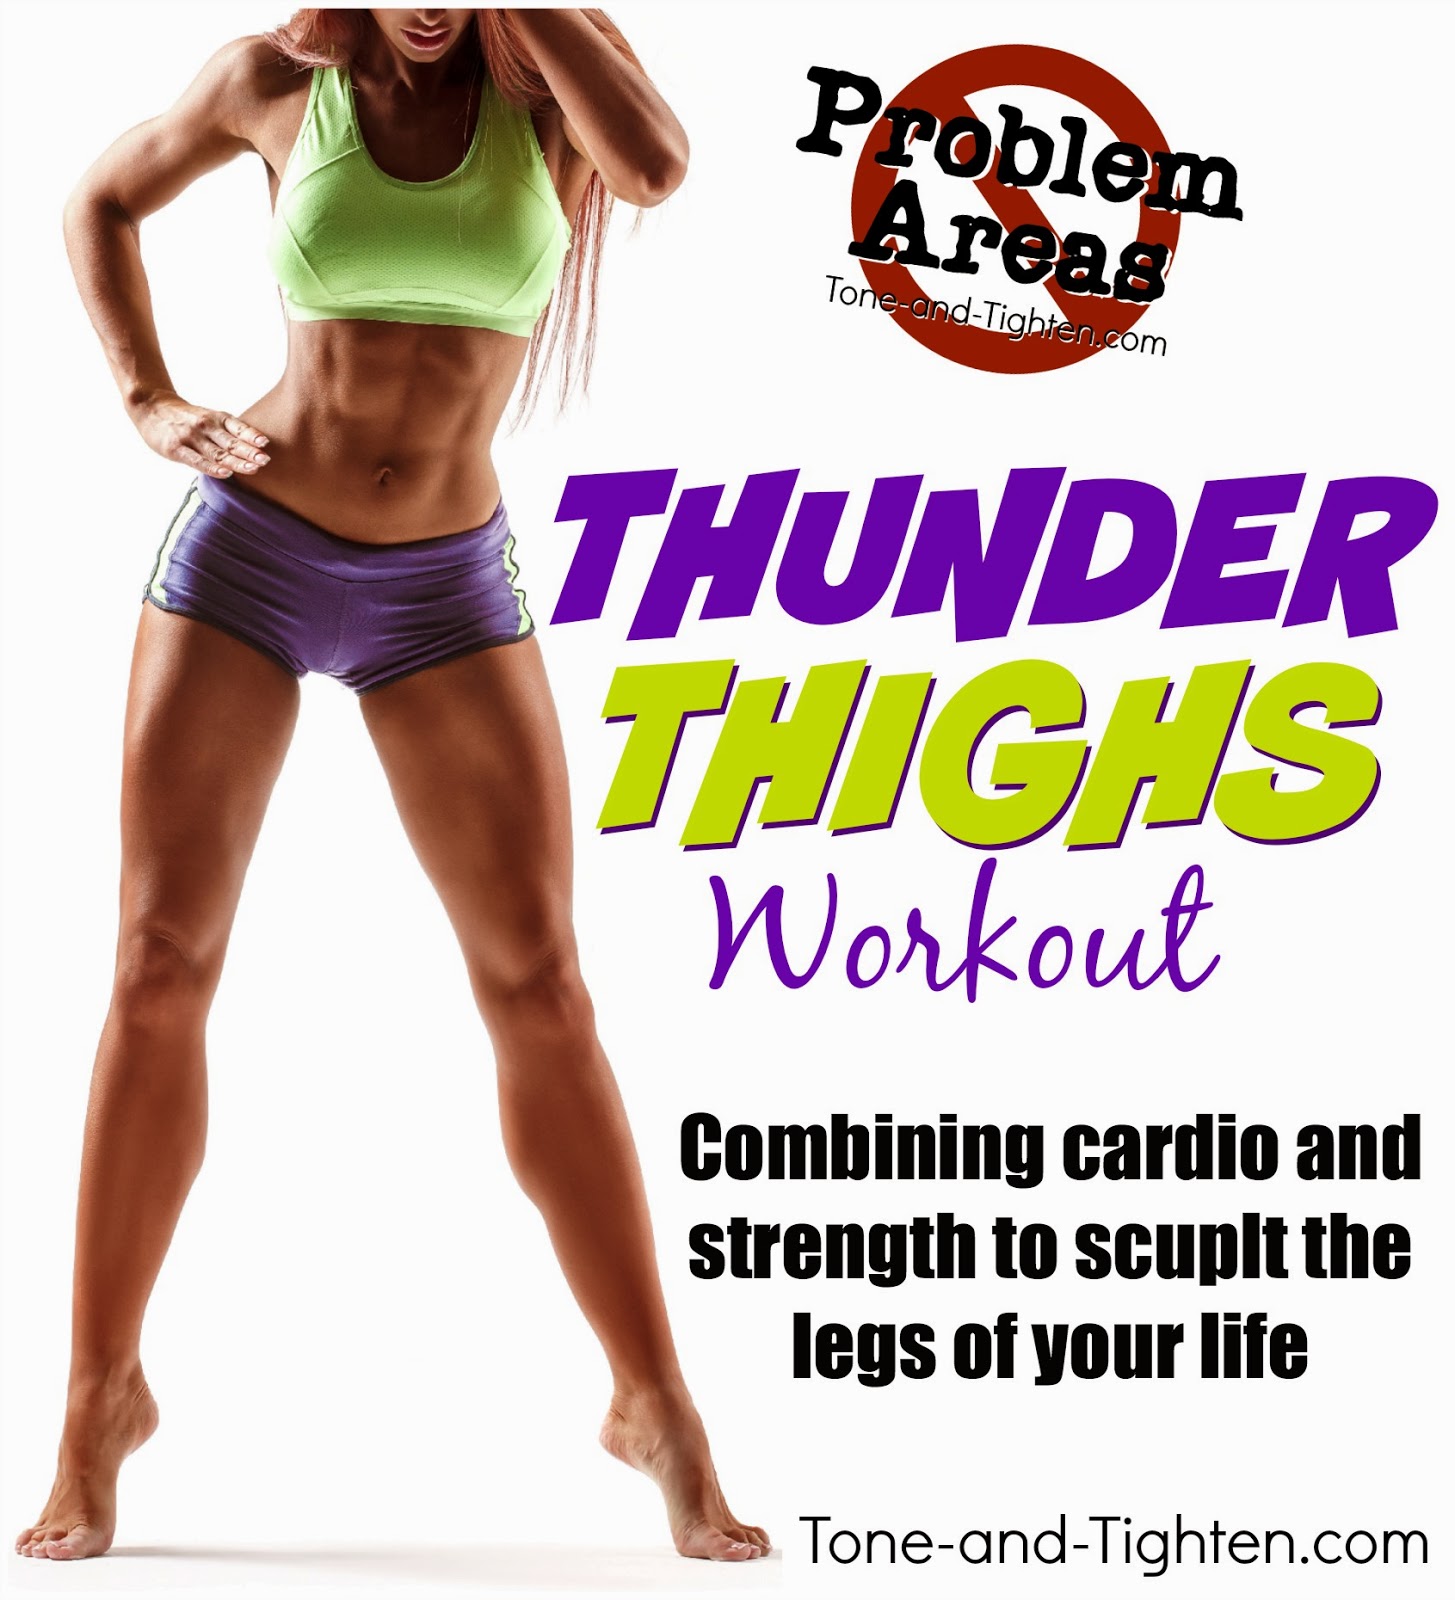 The best workout to eliminate Thunder Thighs! Combining strength and cardio moves to tone and tighten your legs. From Tone-and-Tighten.com